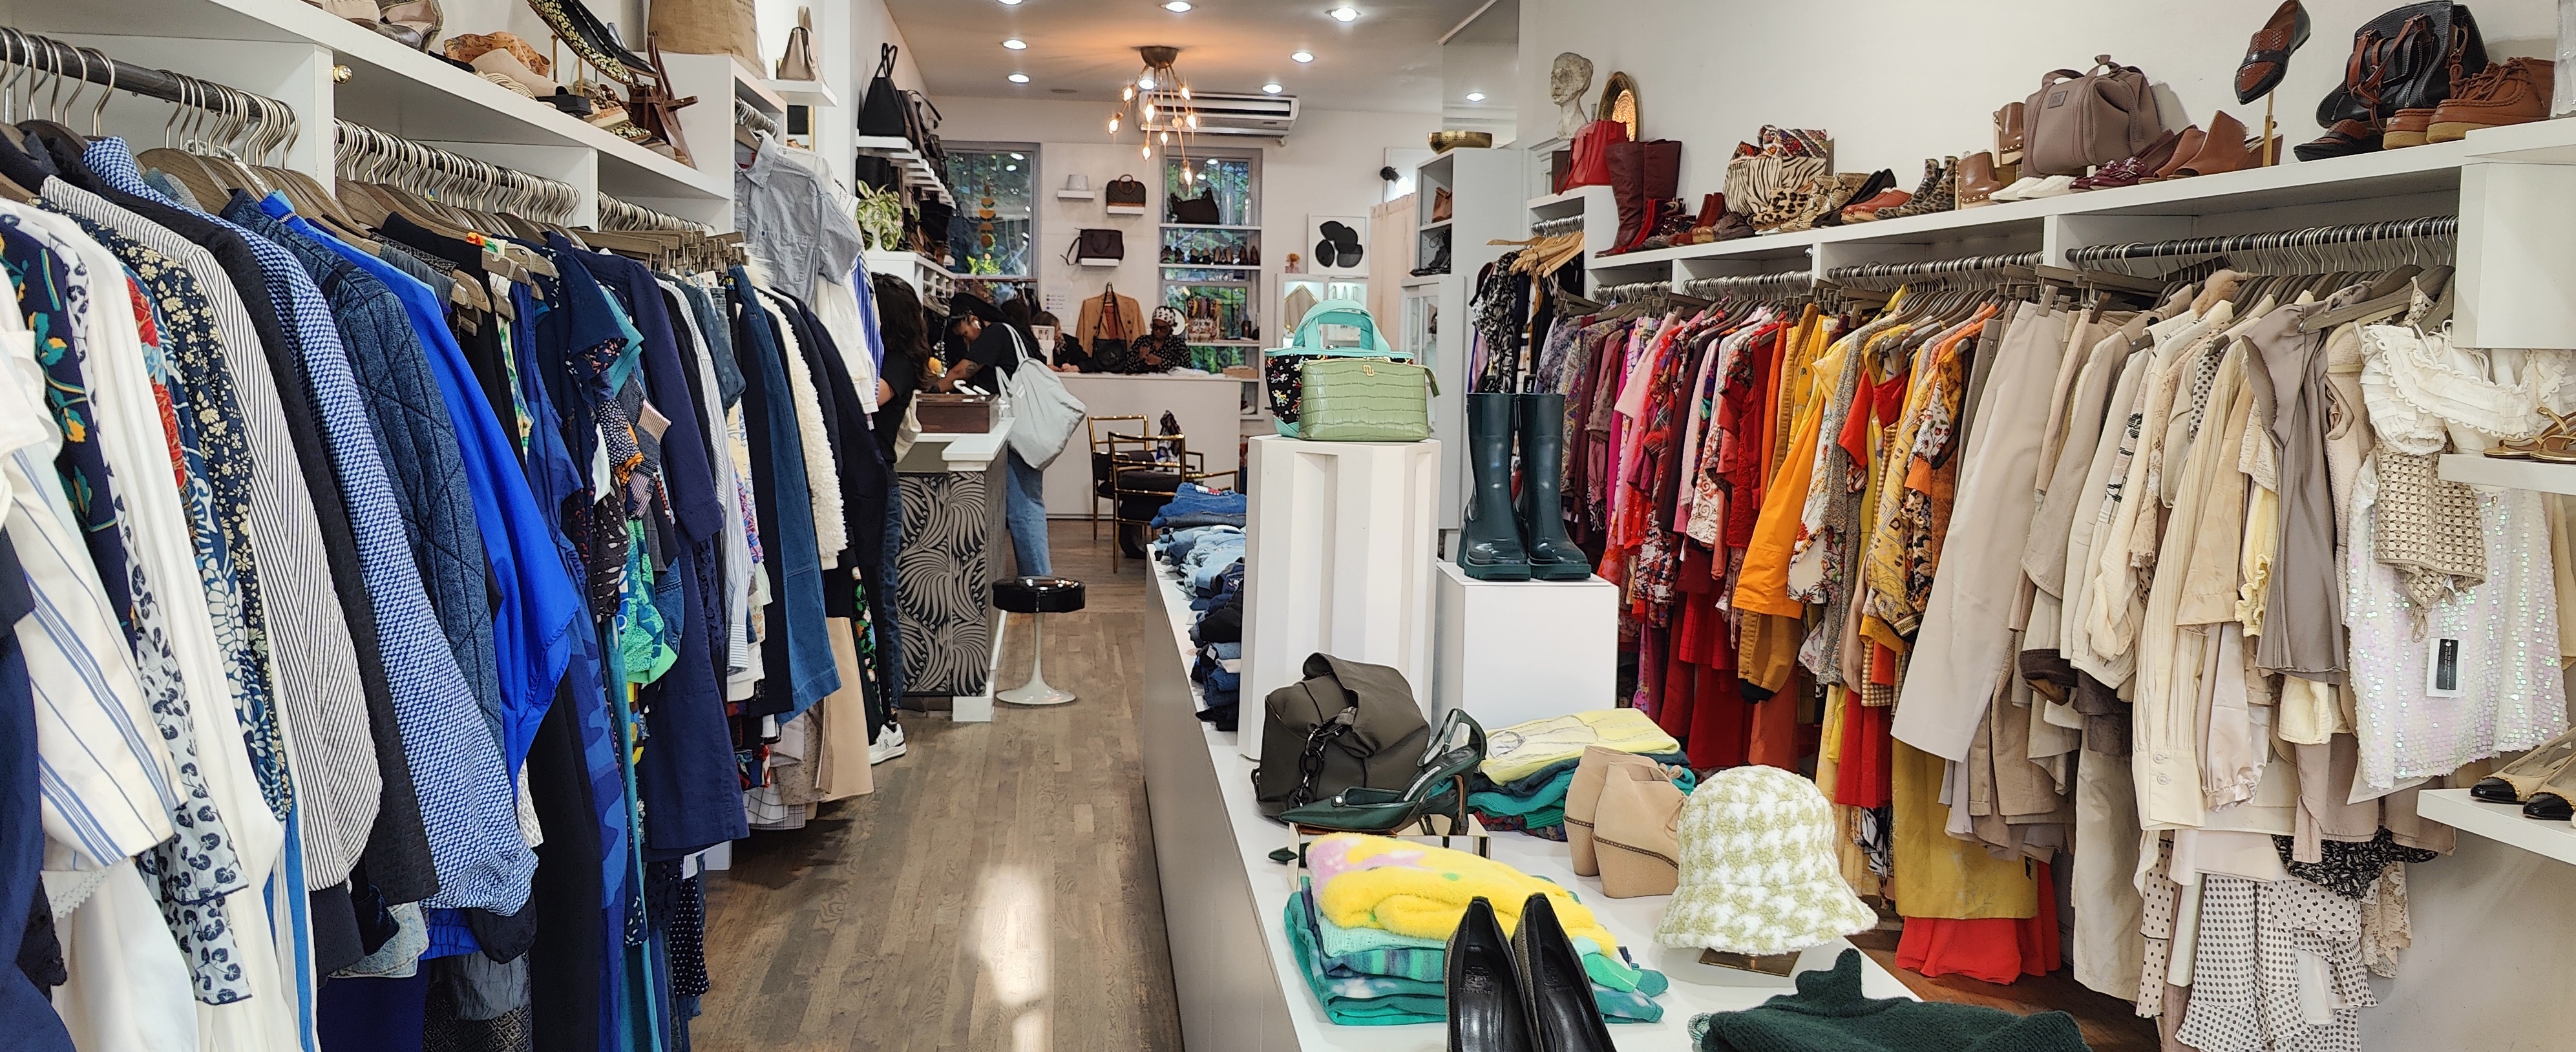 Secondhand shops and thrift stores in New York_Brooklyn Consignment